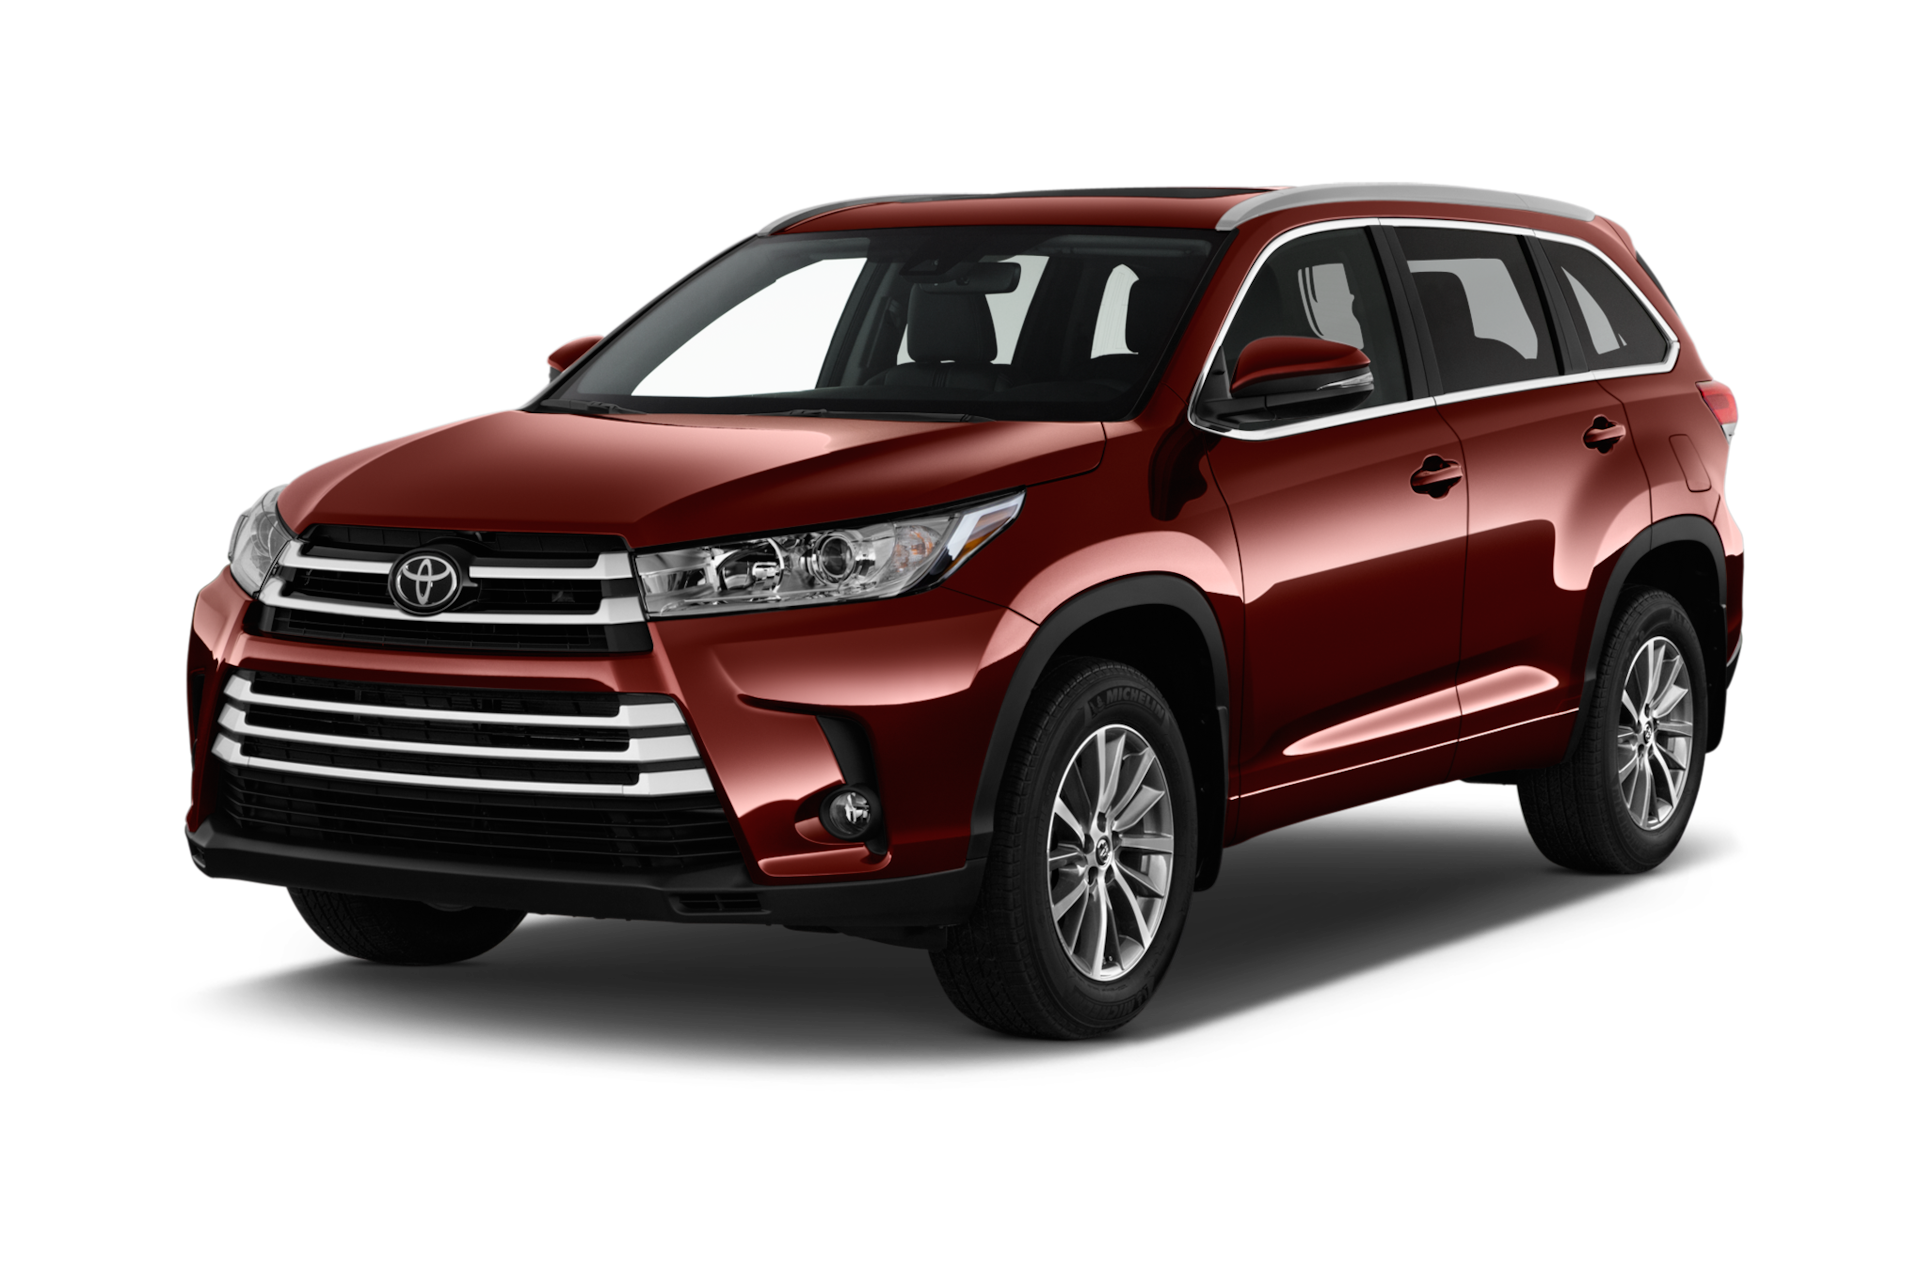 2019 Toyota Highlander Hybrid Prices, Reviews, and Photos - MotorTrend